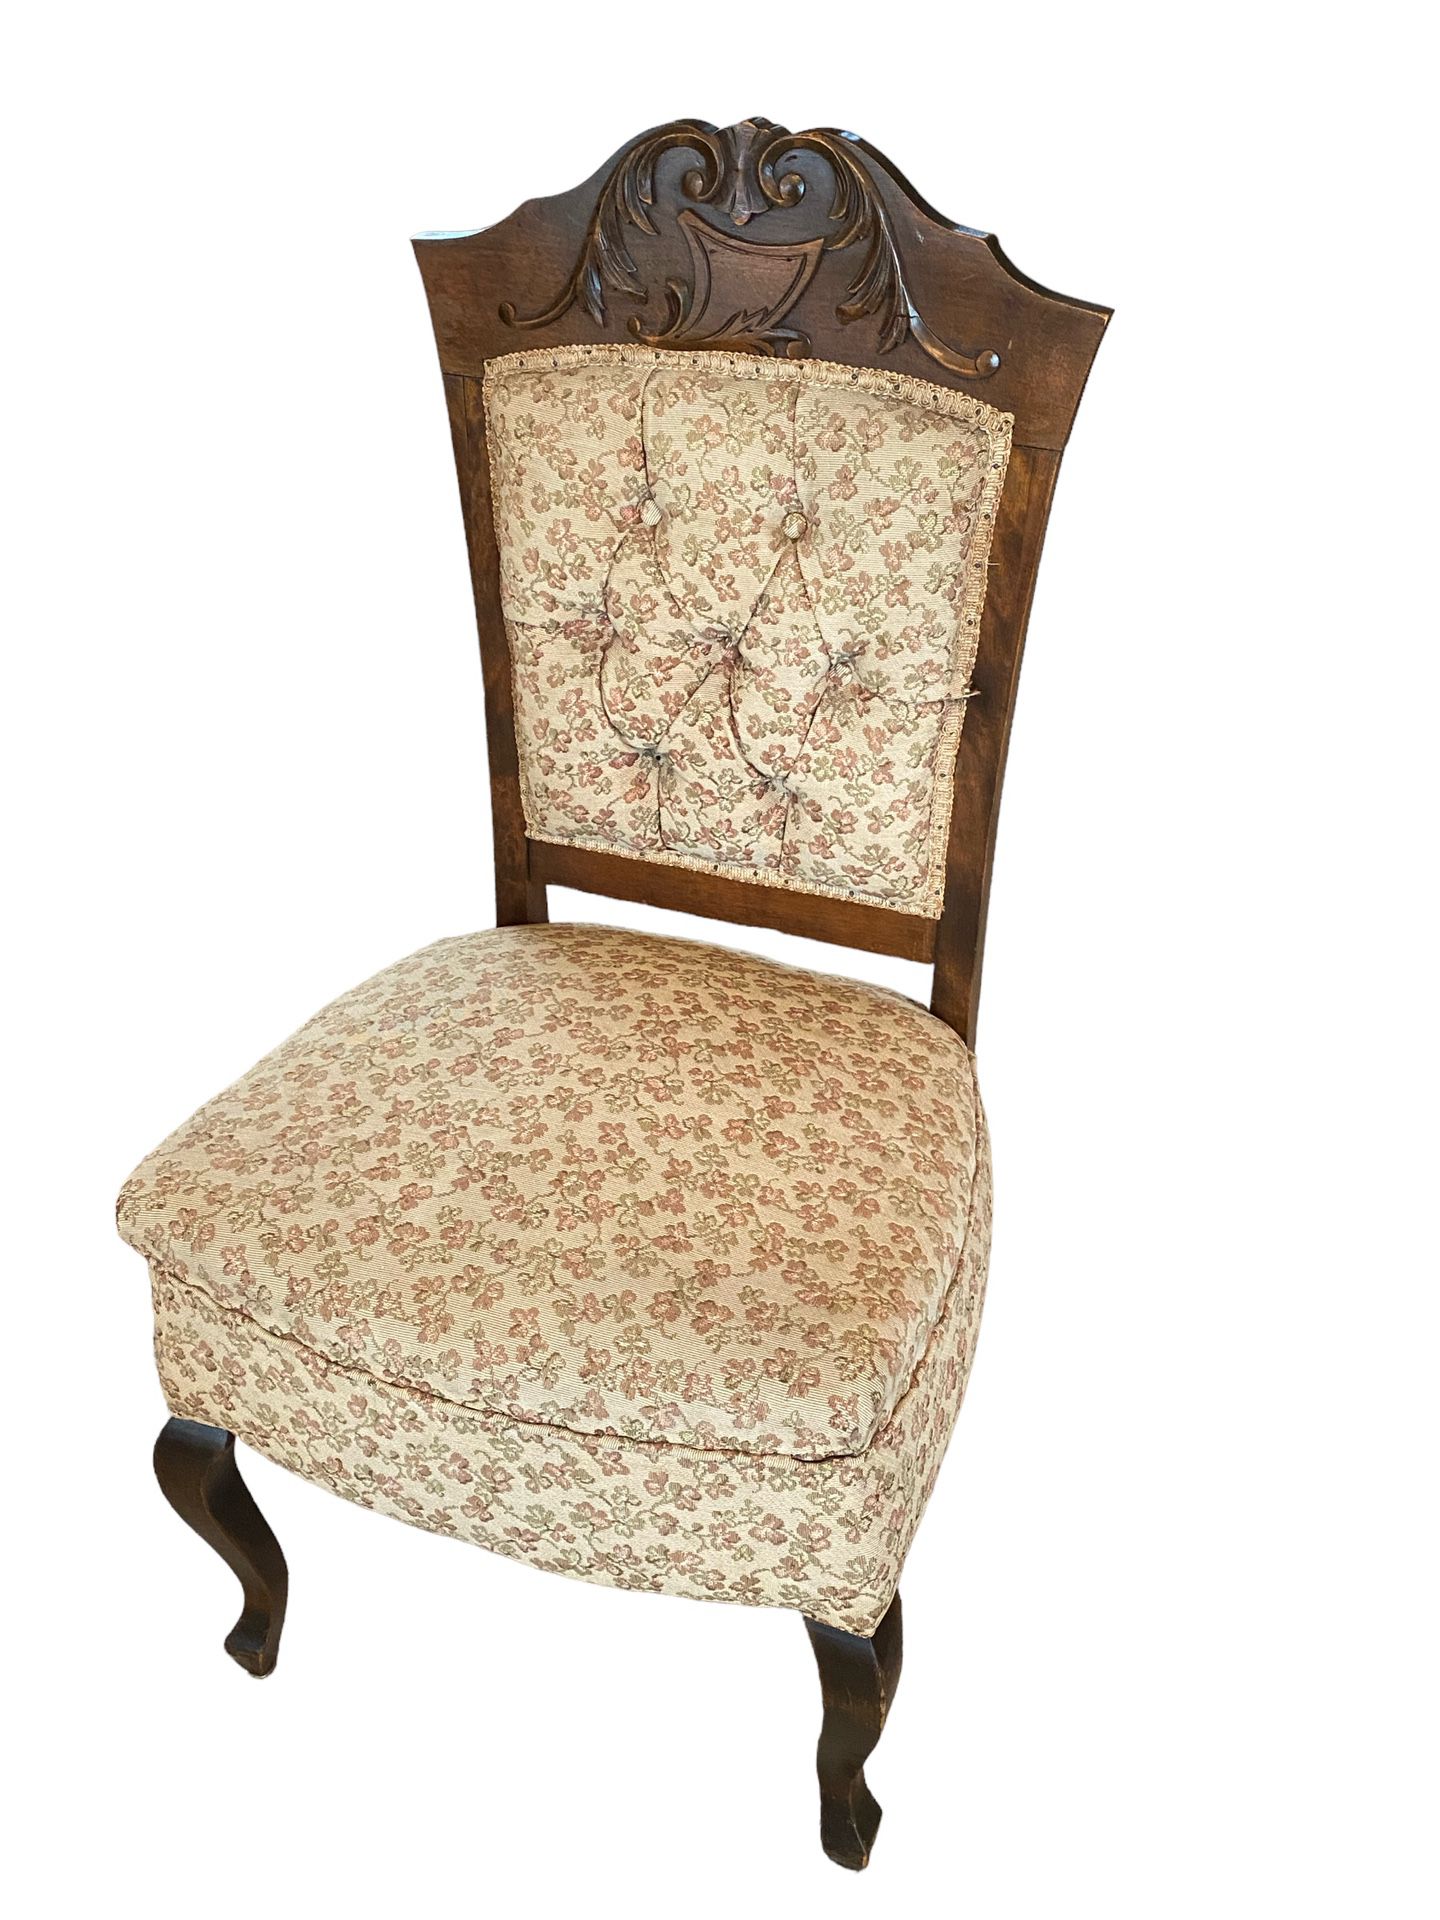 Antique Carved Wooden Chair with Ornate Floral Pattern Spring Seat Cushion